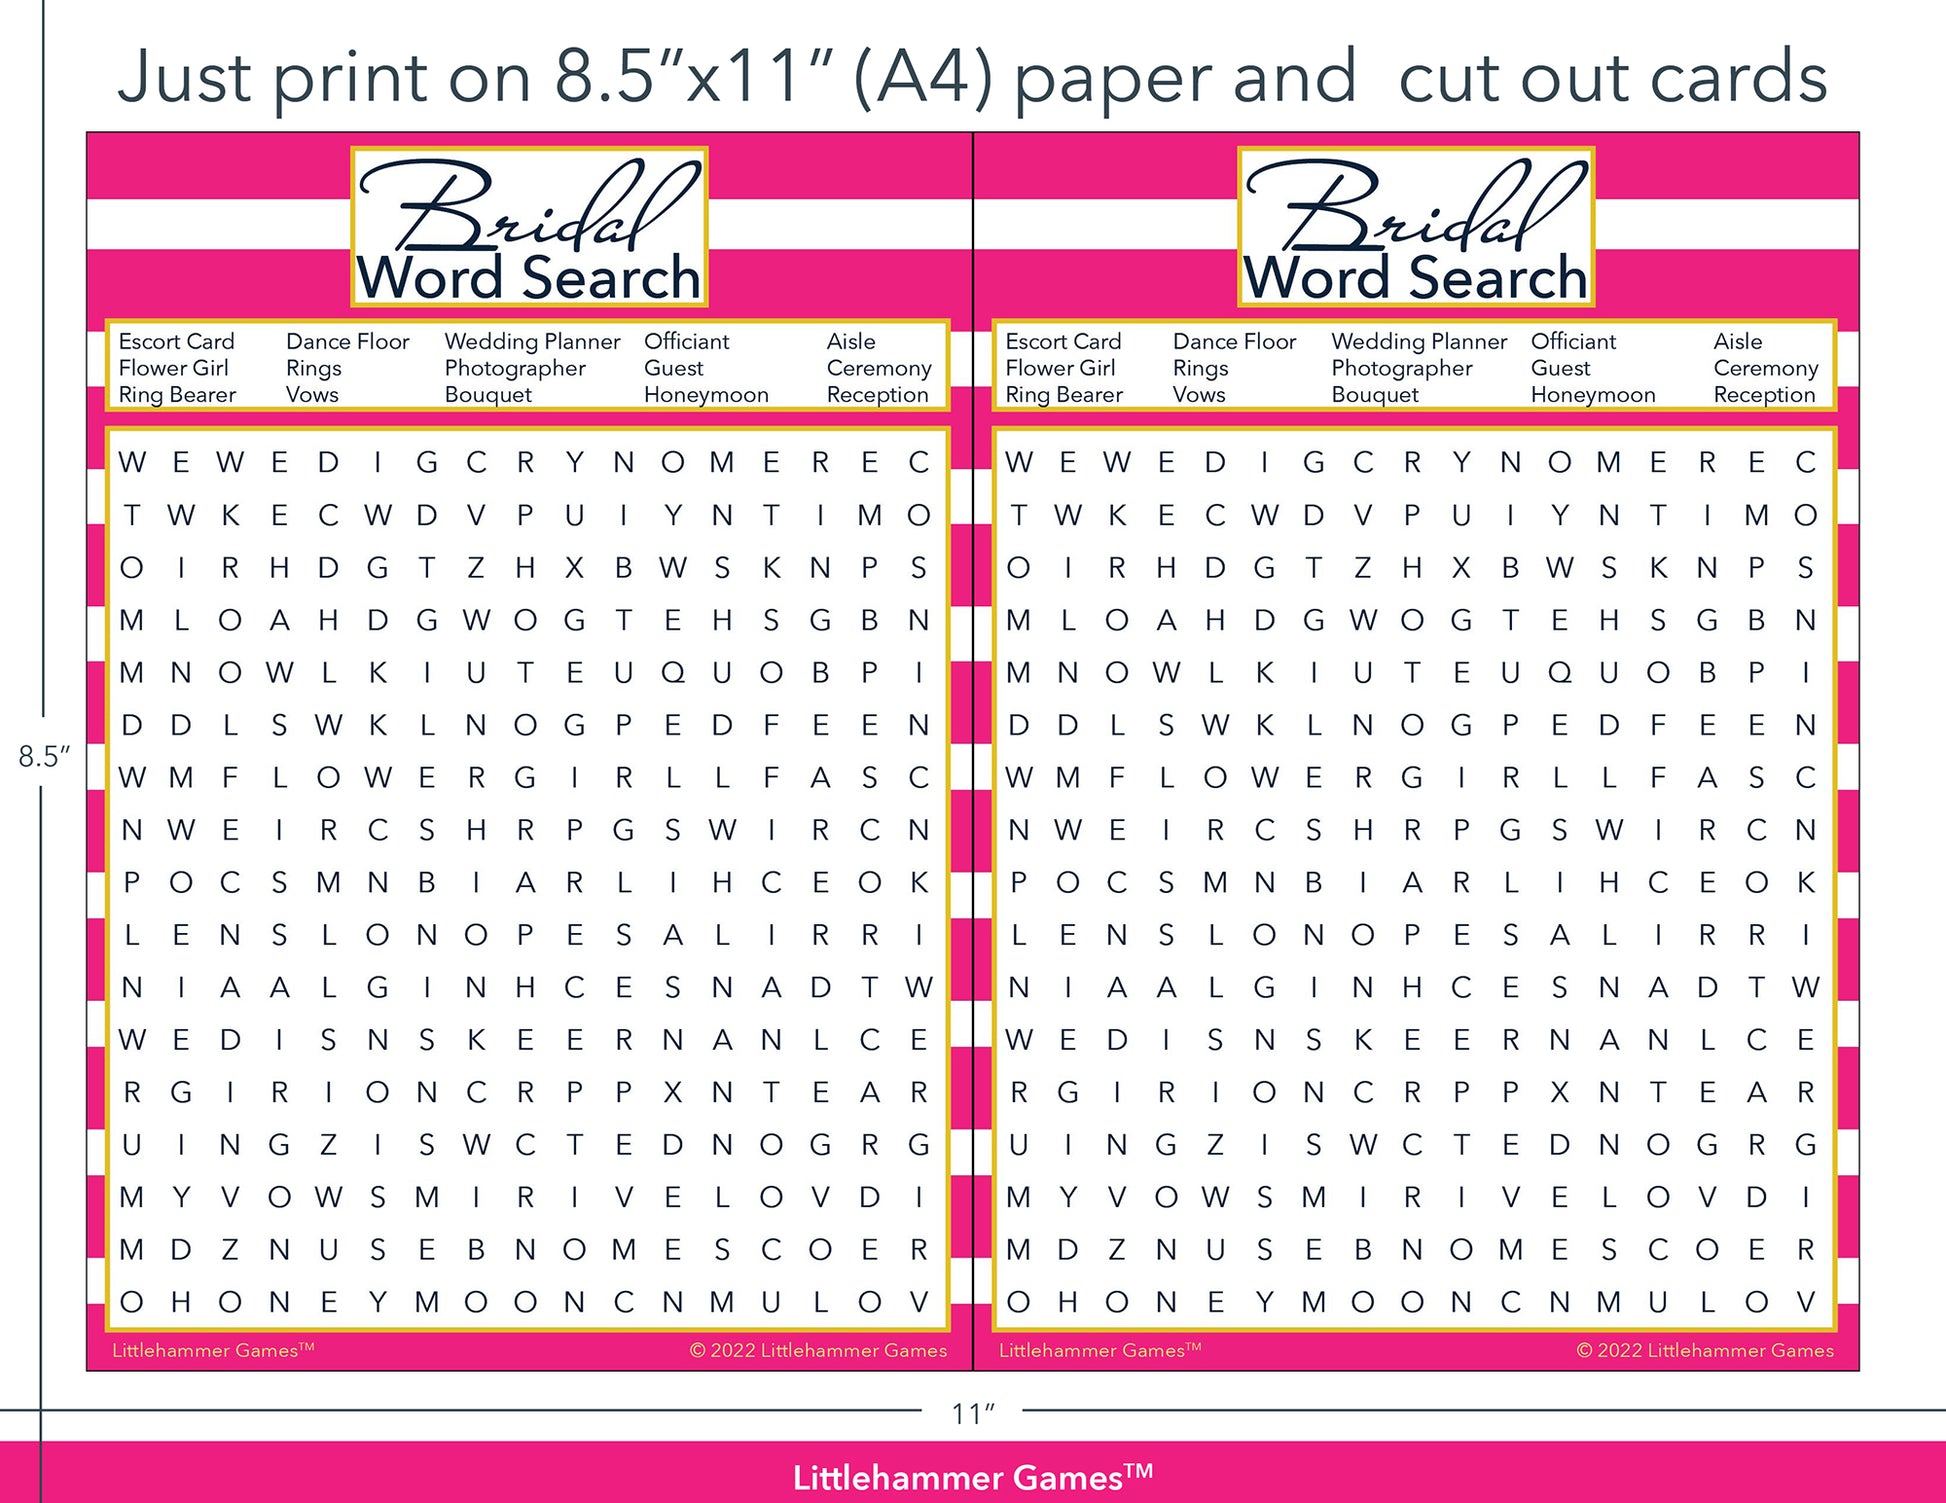 Bridal Word Search pink-striped game cards with printing instructions